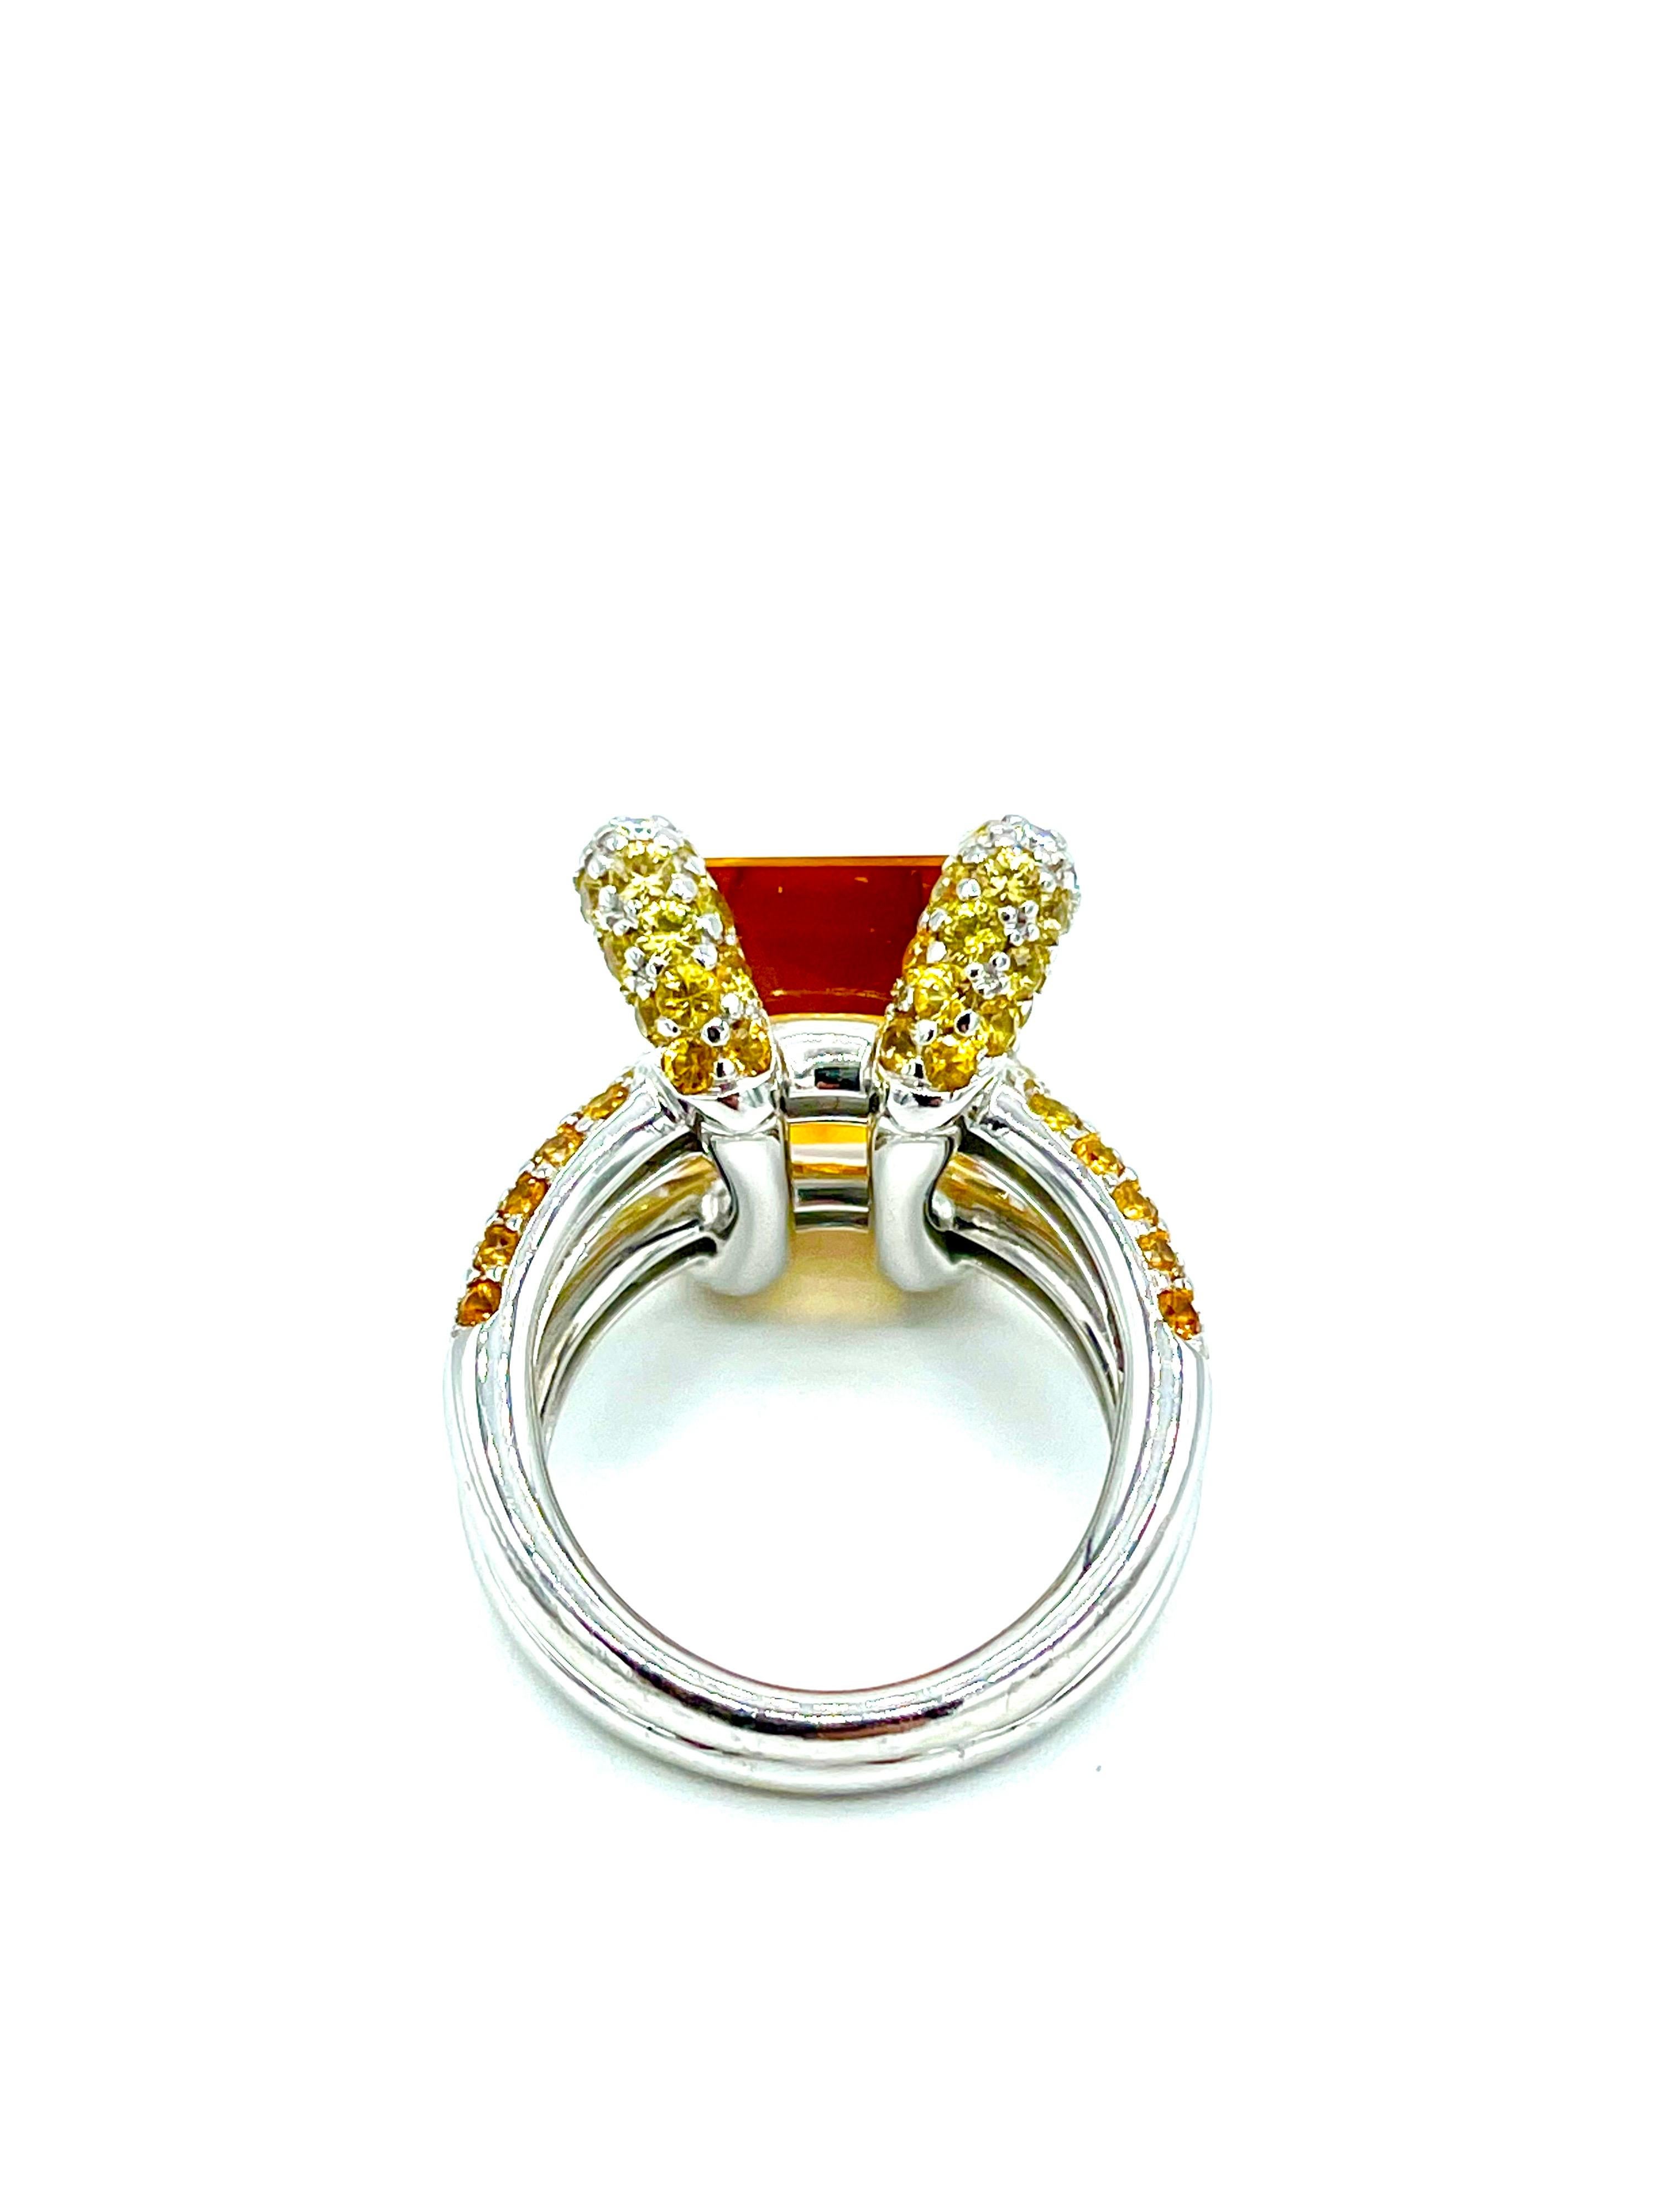 Modern 6.00 Carat Madeira Citrine in a Pave Diamond and Citrine White Gold Ring For Sale